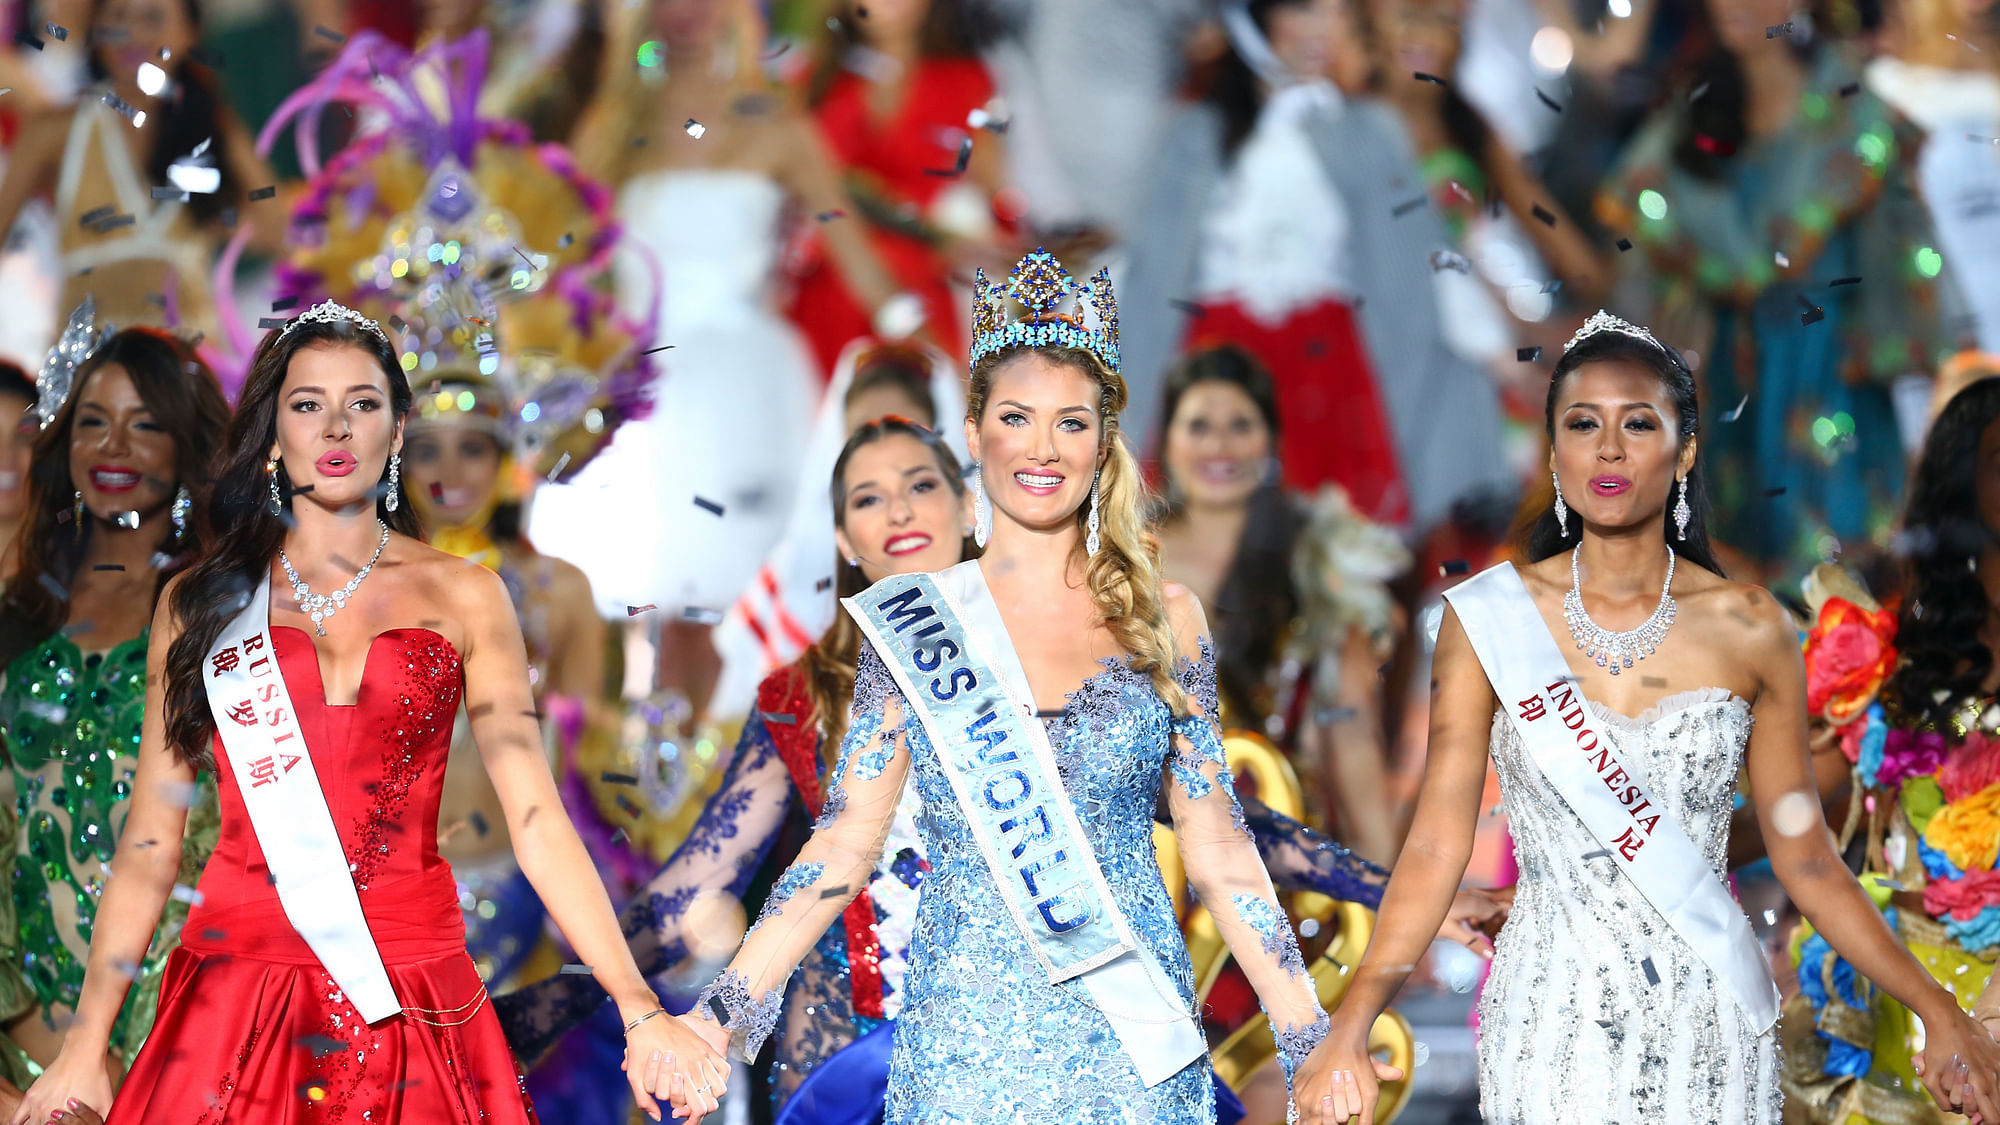 Miss World Mireia Lalaguna Royo from Spain, center, Sofia Nikitchuk from Russia, left, the runner-up, and Maria Harfanti from Indonesia, right, the second runner-up celebrate at the end of the 2015 Miss World Grand Final in Sanya in south China’s Hainan province Saturday Dec. 19, 2015. (Photo: AP)